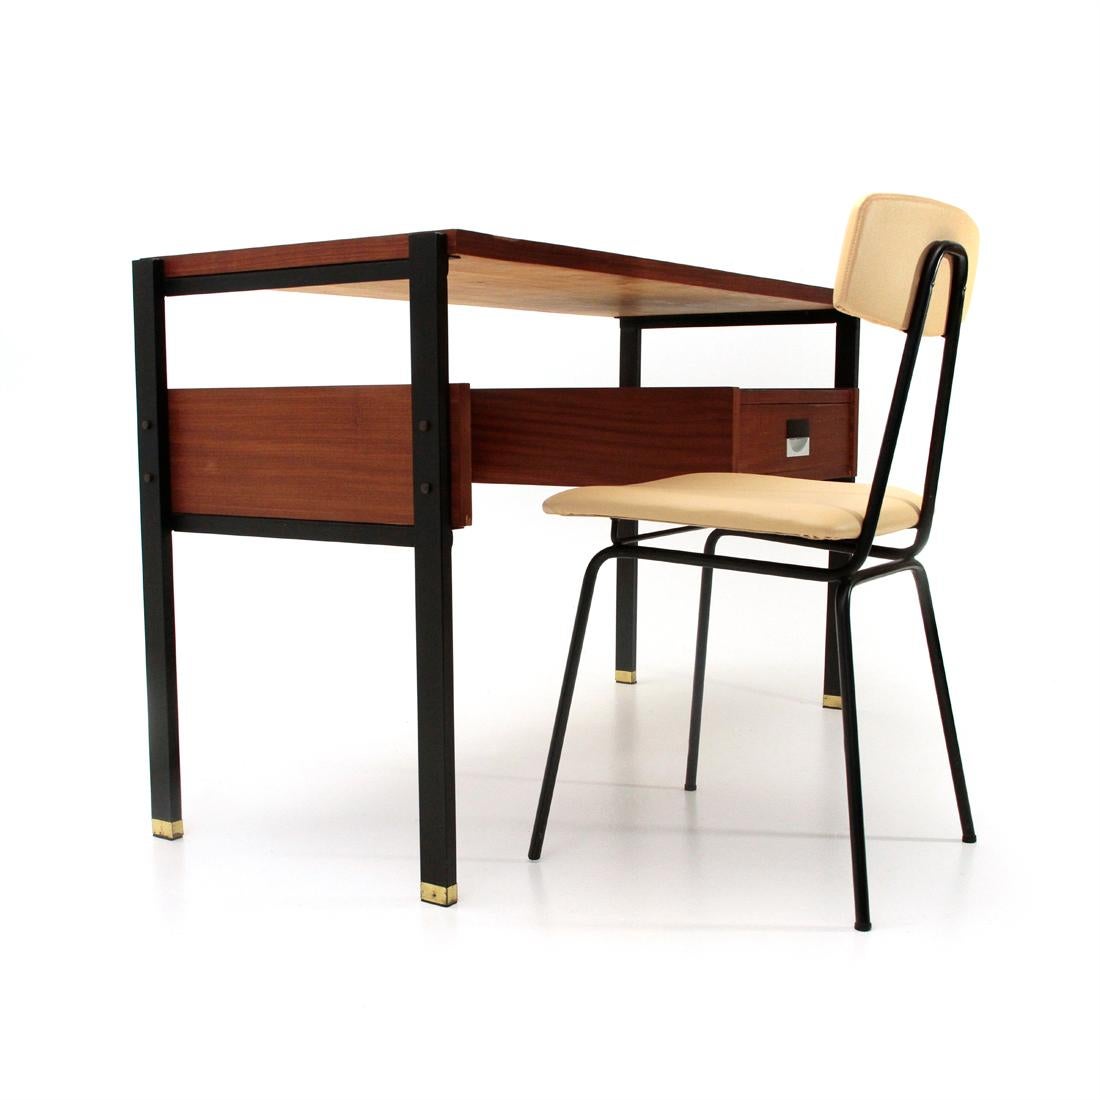 Desk and chair produced by Giuseppe Brusadelli in the 50s.
Structure and legs in black painted metal.
Sides and top in teak veneered wood.
Drawer with two-colored plastic handle.
Feet in brass.
Metal tubular chair folded and painted